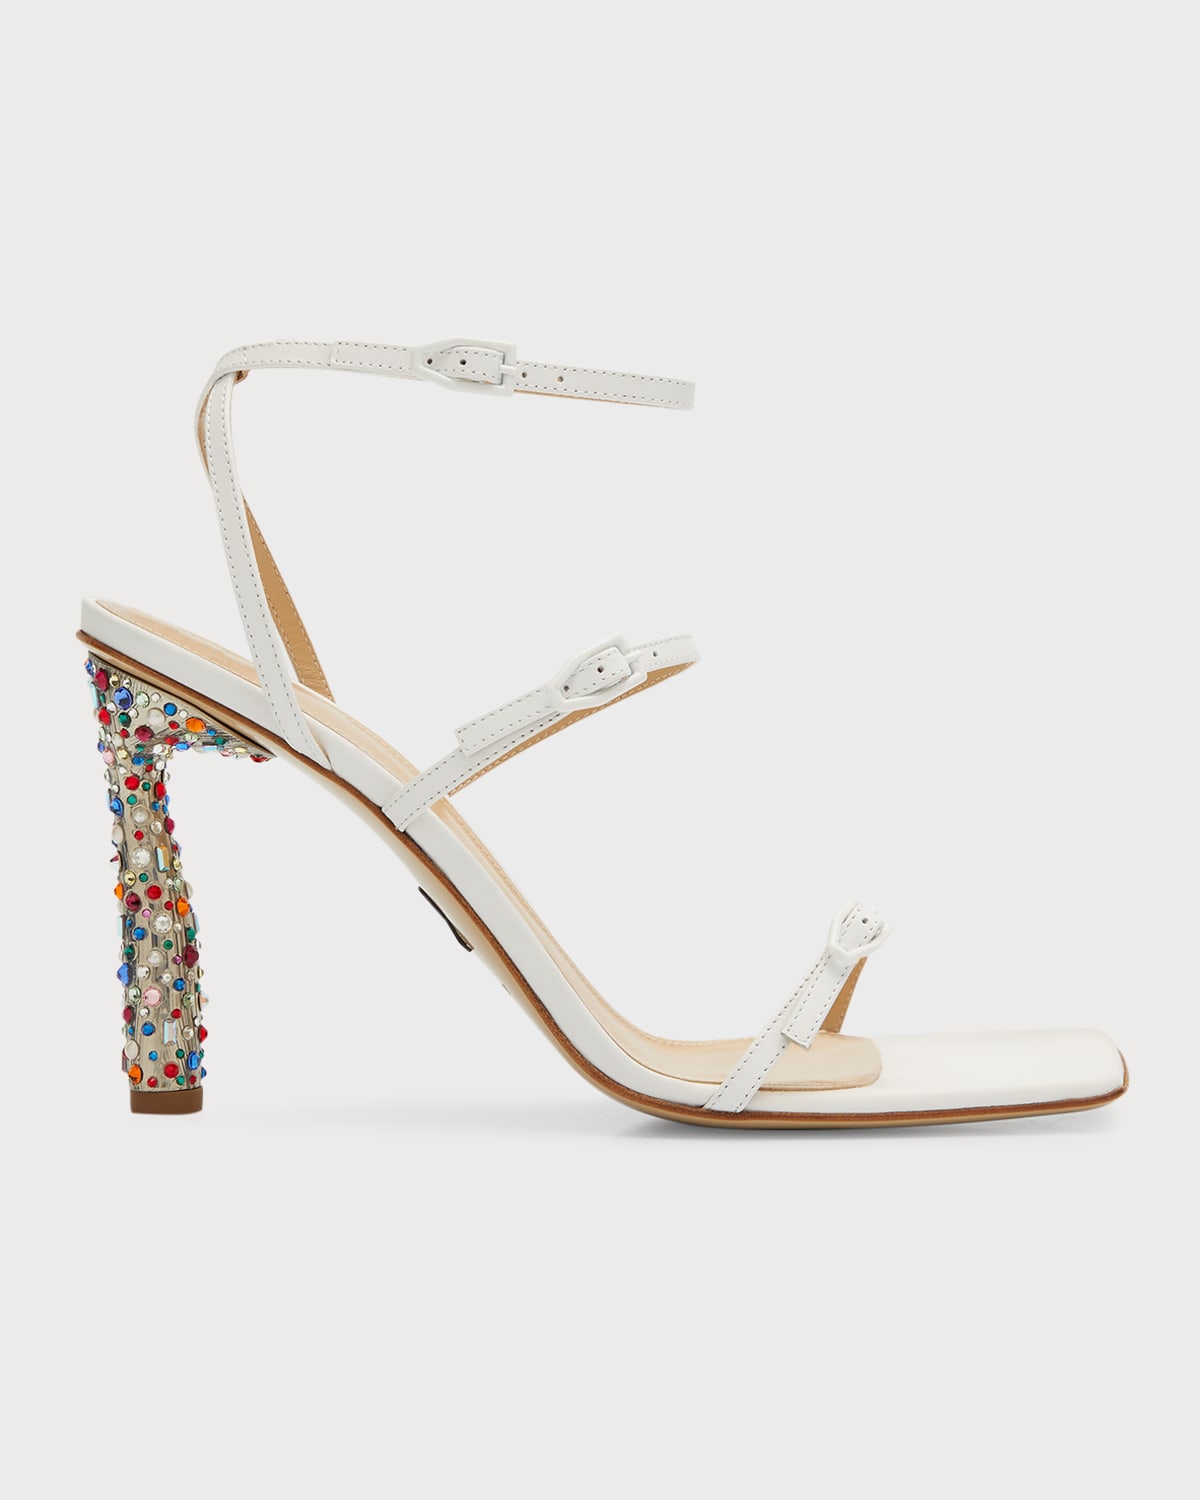 PAUL ANDREW MULTICOLORED CRYSTAL THREE-BUCKLE SANDALS